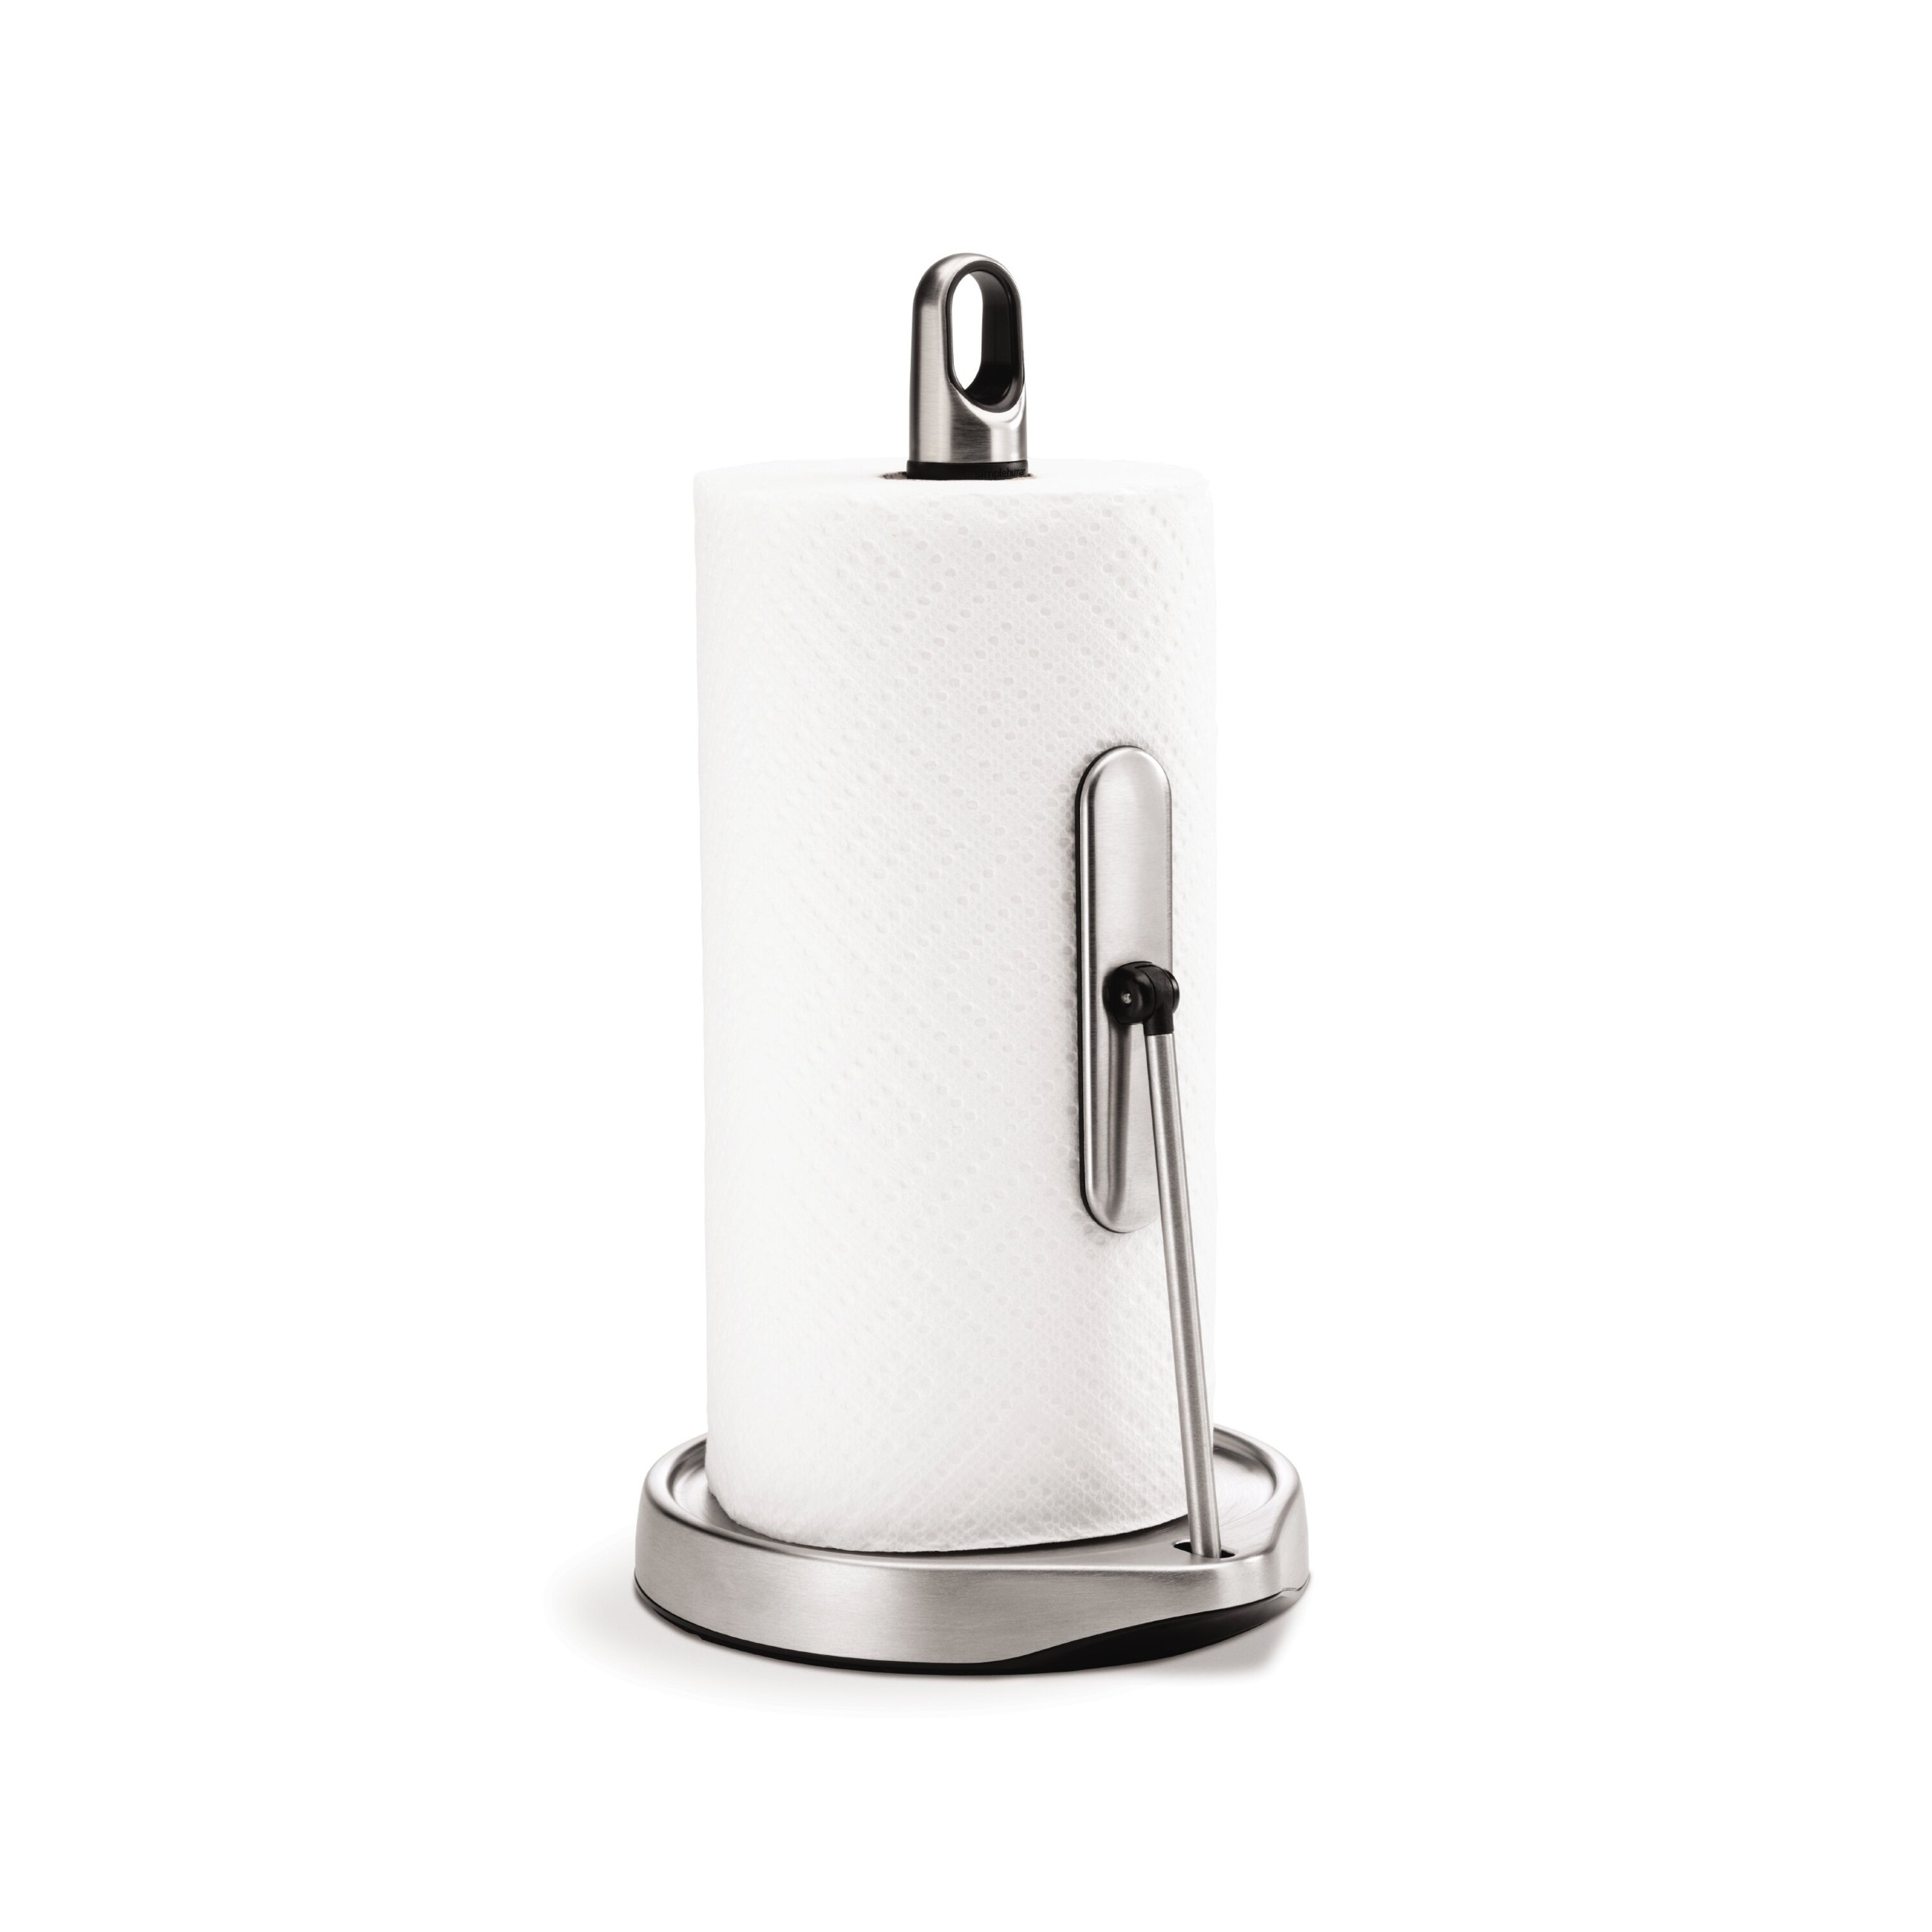 Simplehuman tension arm paper towel holder in stainless